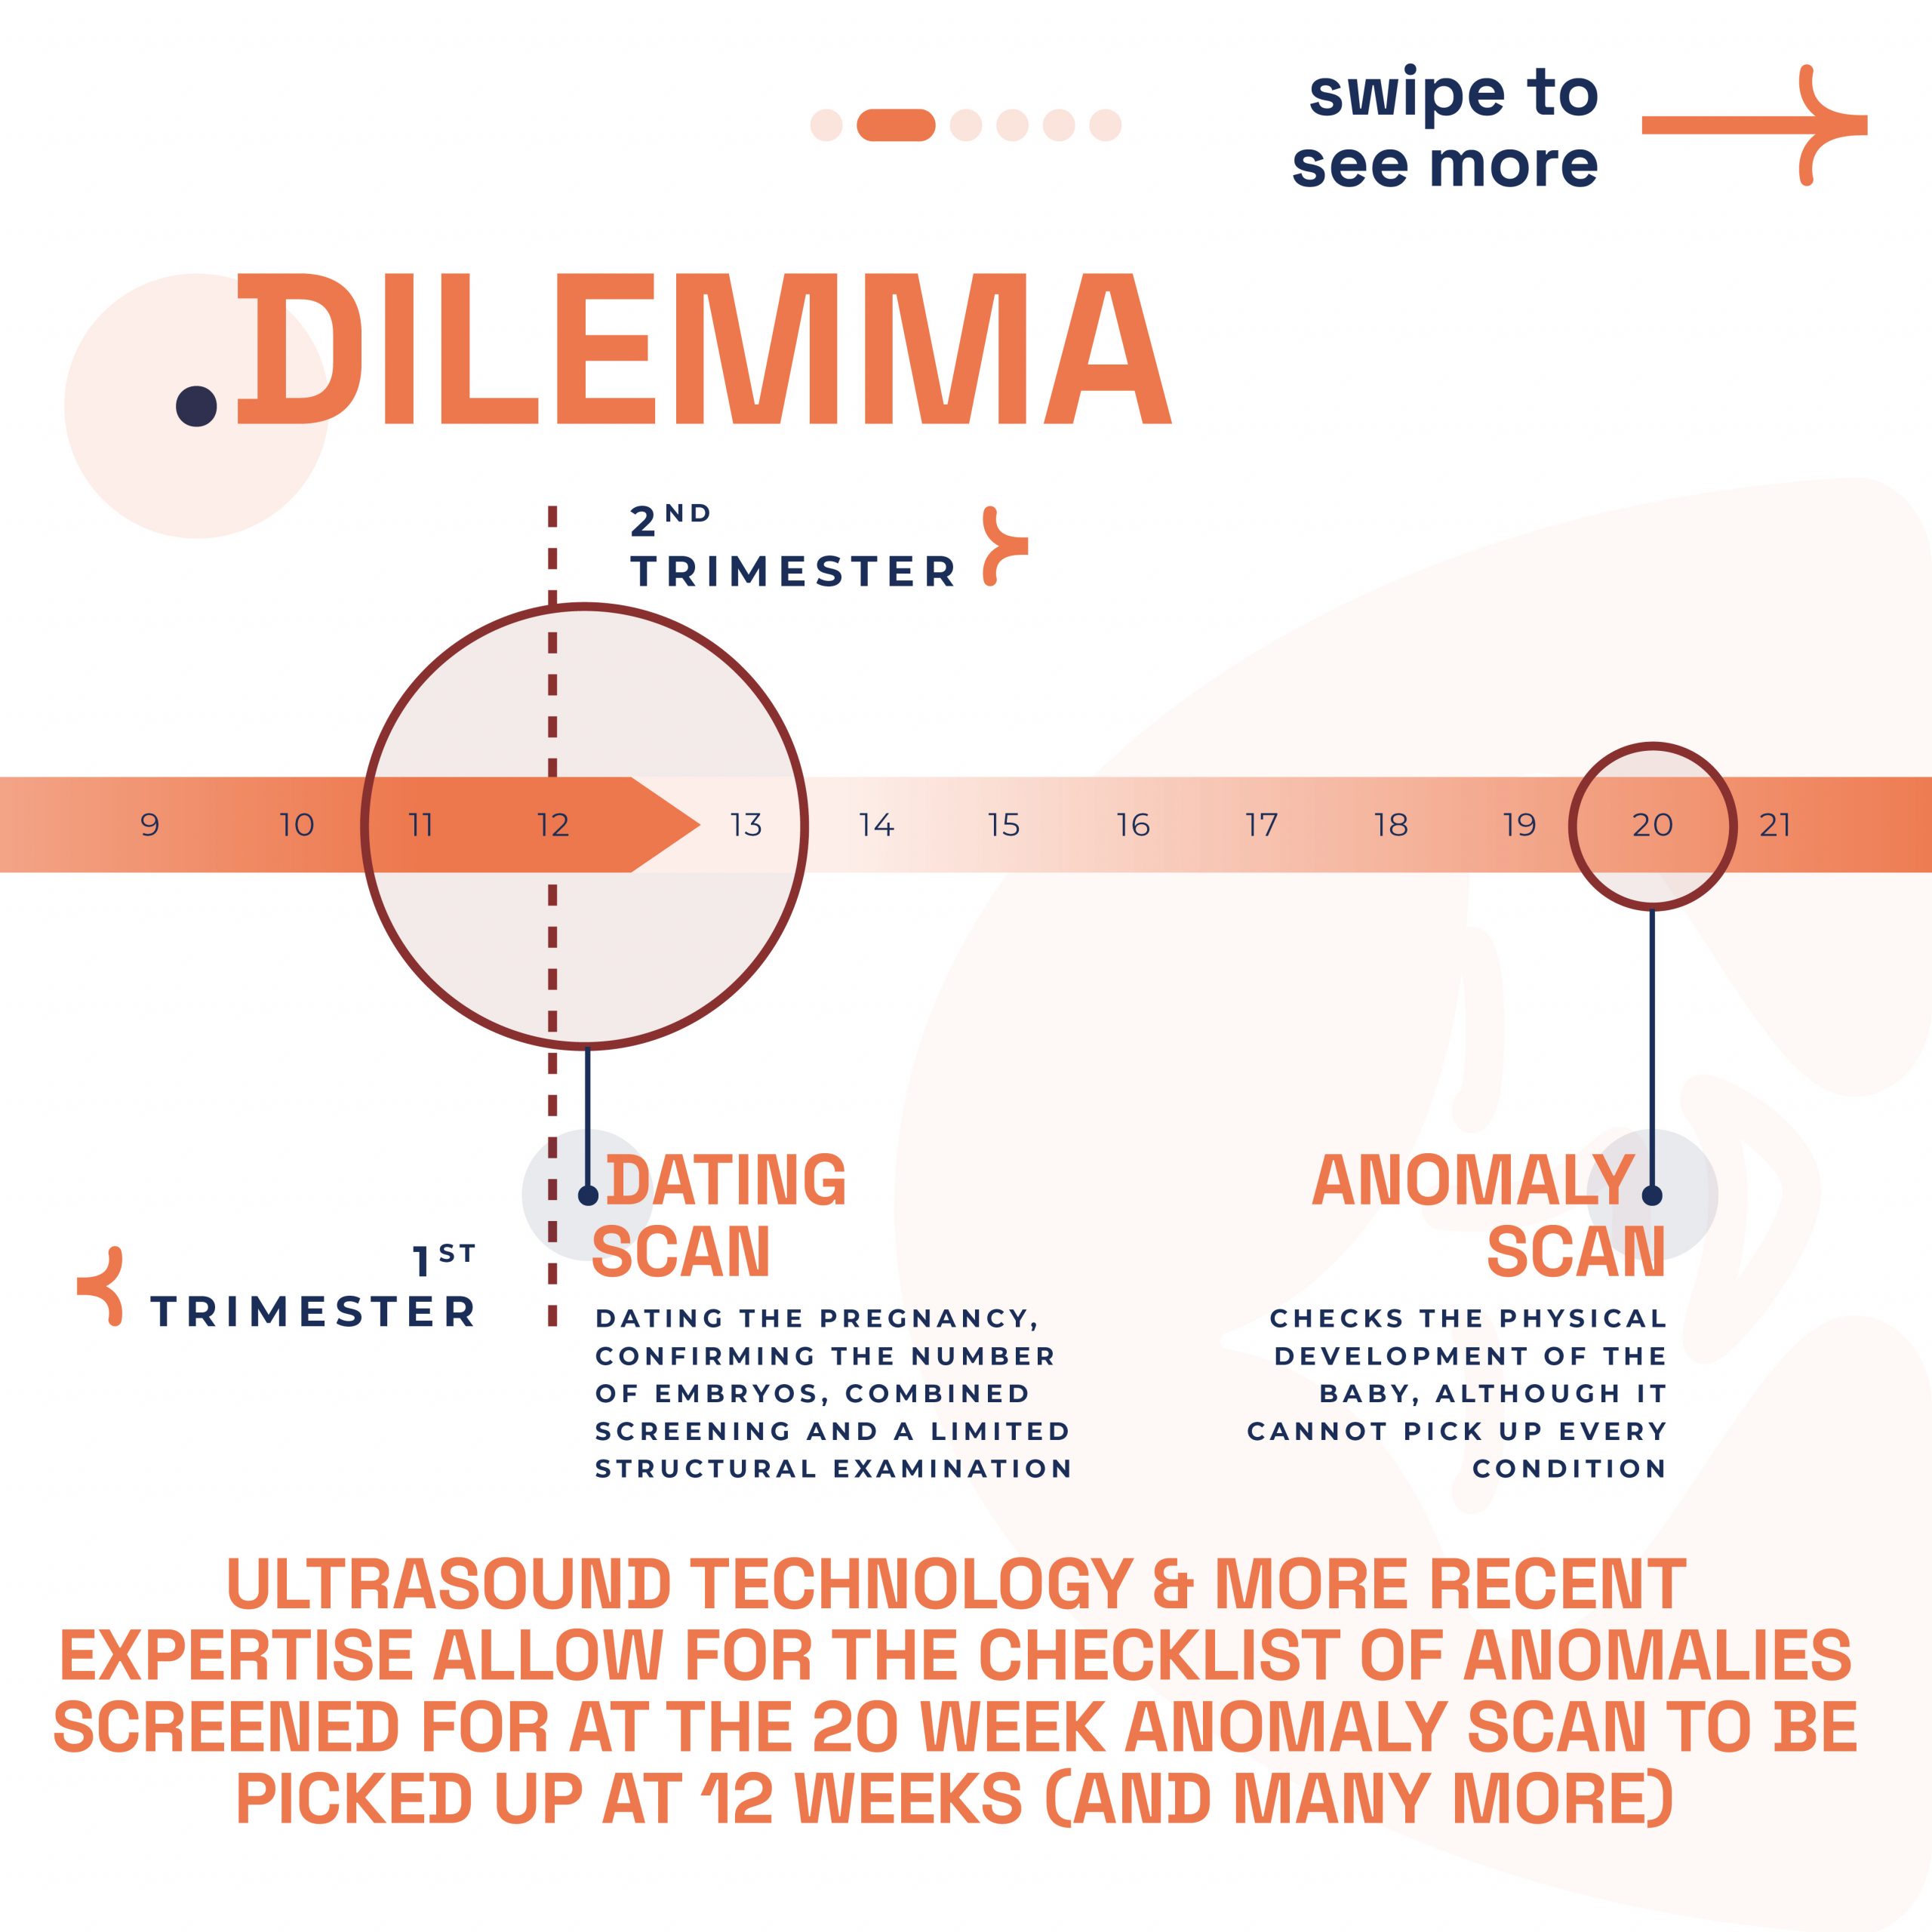 Infographic highlighting the dilemma of scan timing in the first and second trimester for early prenatal care